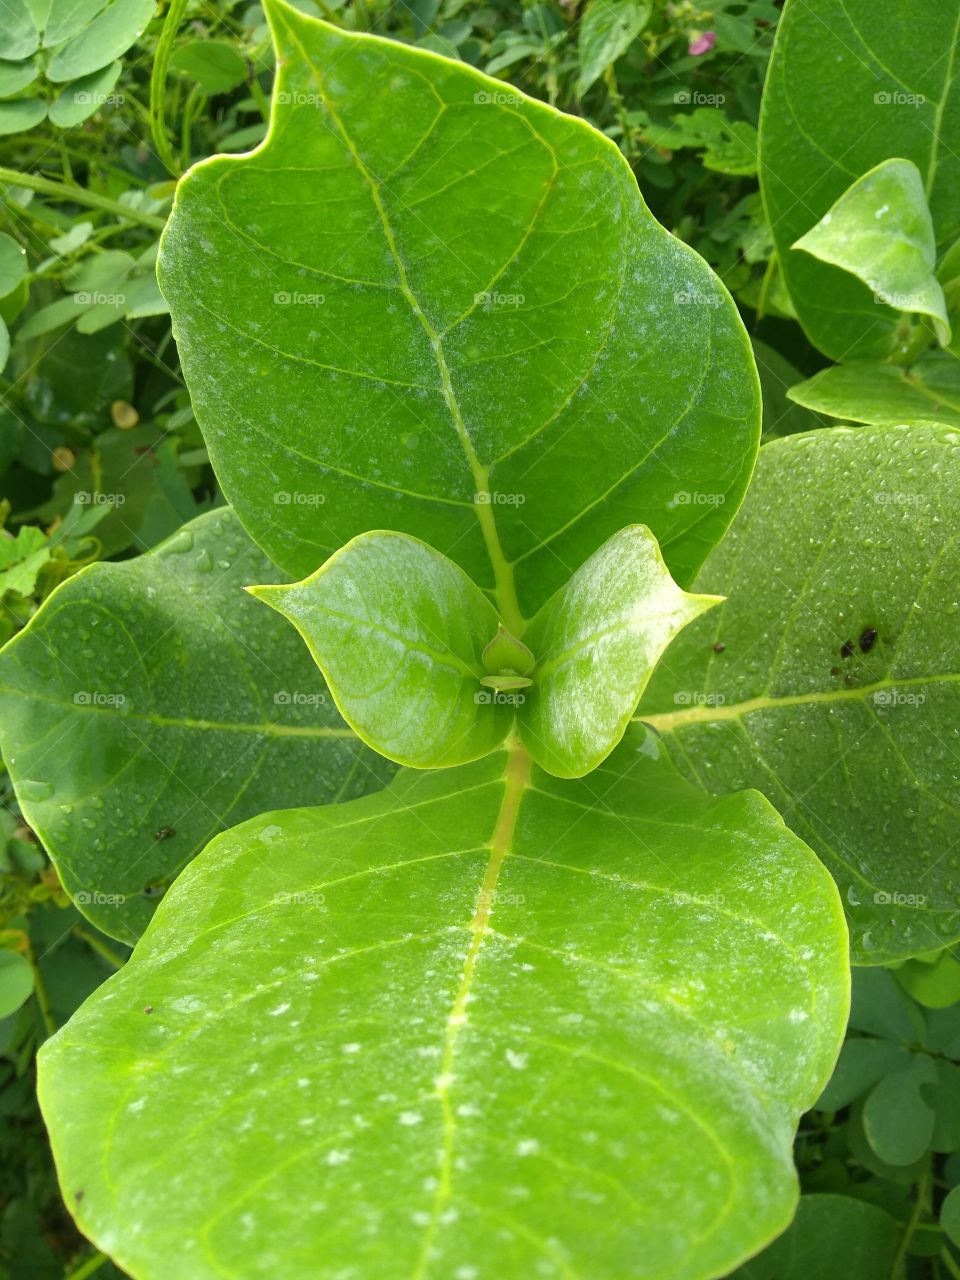 some drizzle drops on greenish leaves.